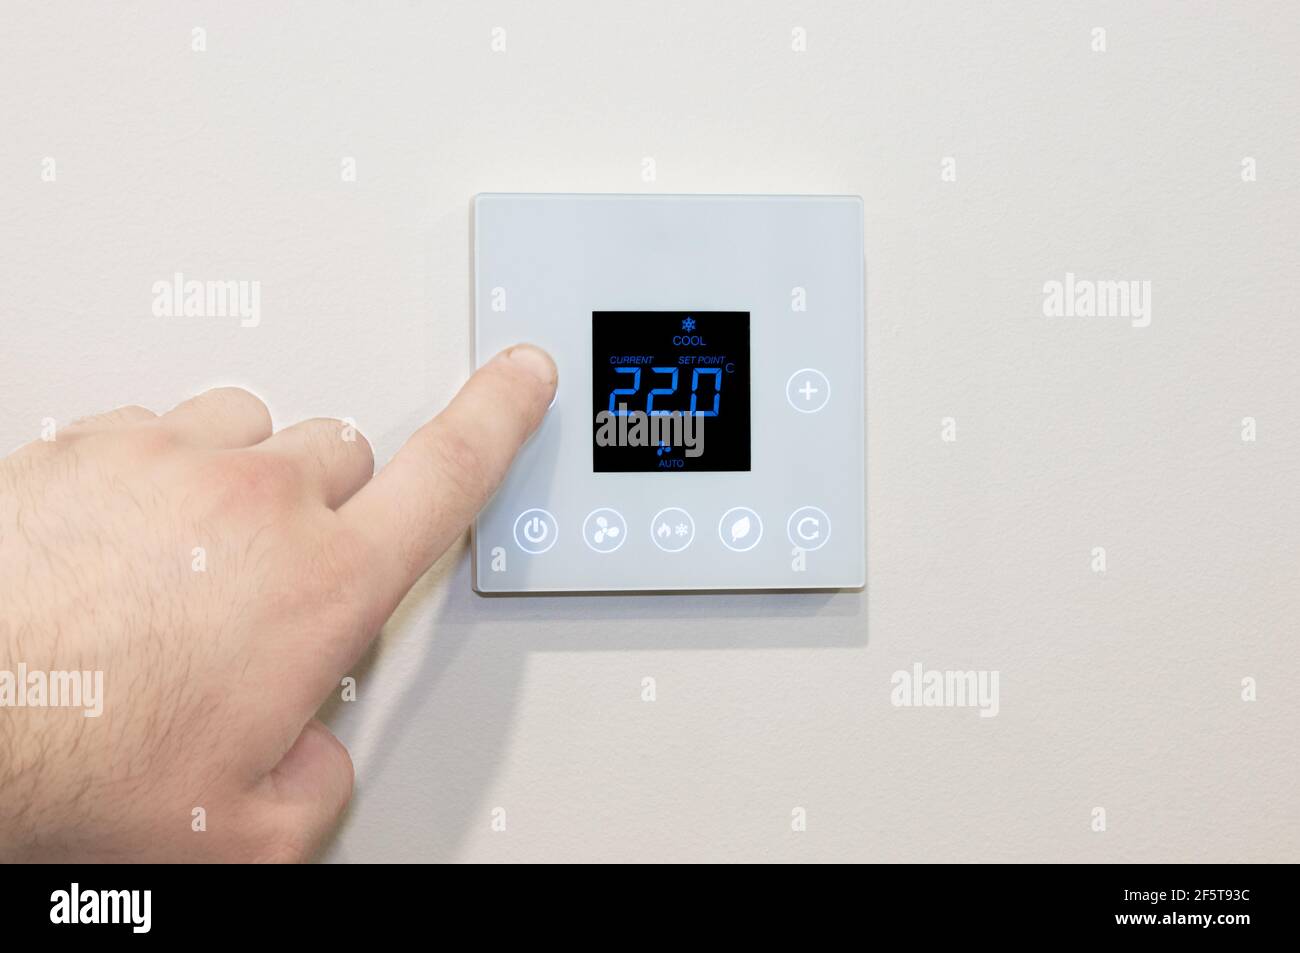 https://c8.alamy.com/comp/2F5T93C/close-up-of-a-caucasian-males-hand-adjusting-a-modern-wall-mounted-digital-thermostat-2F5T93C.jpg